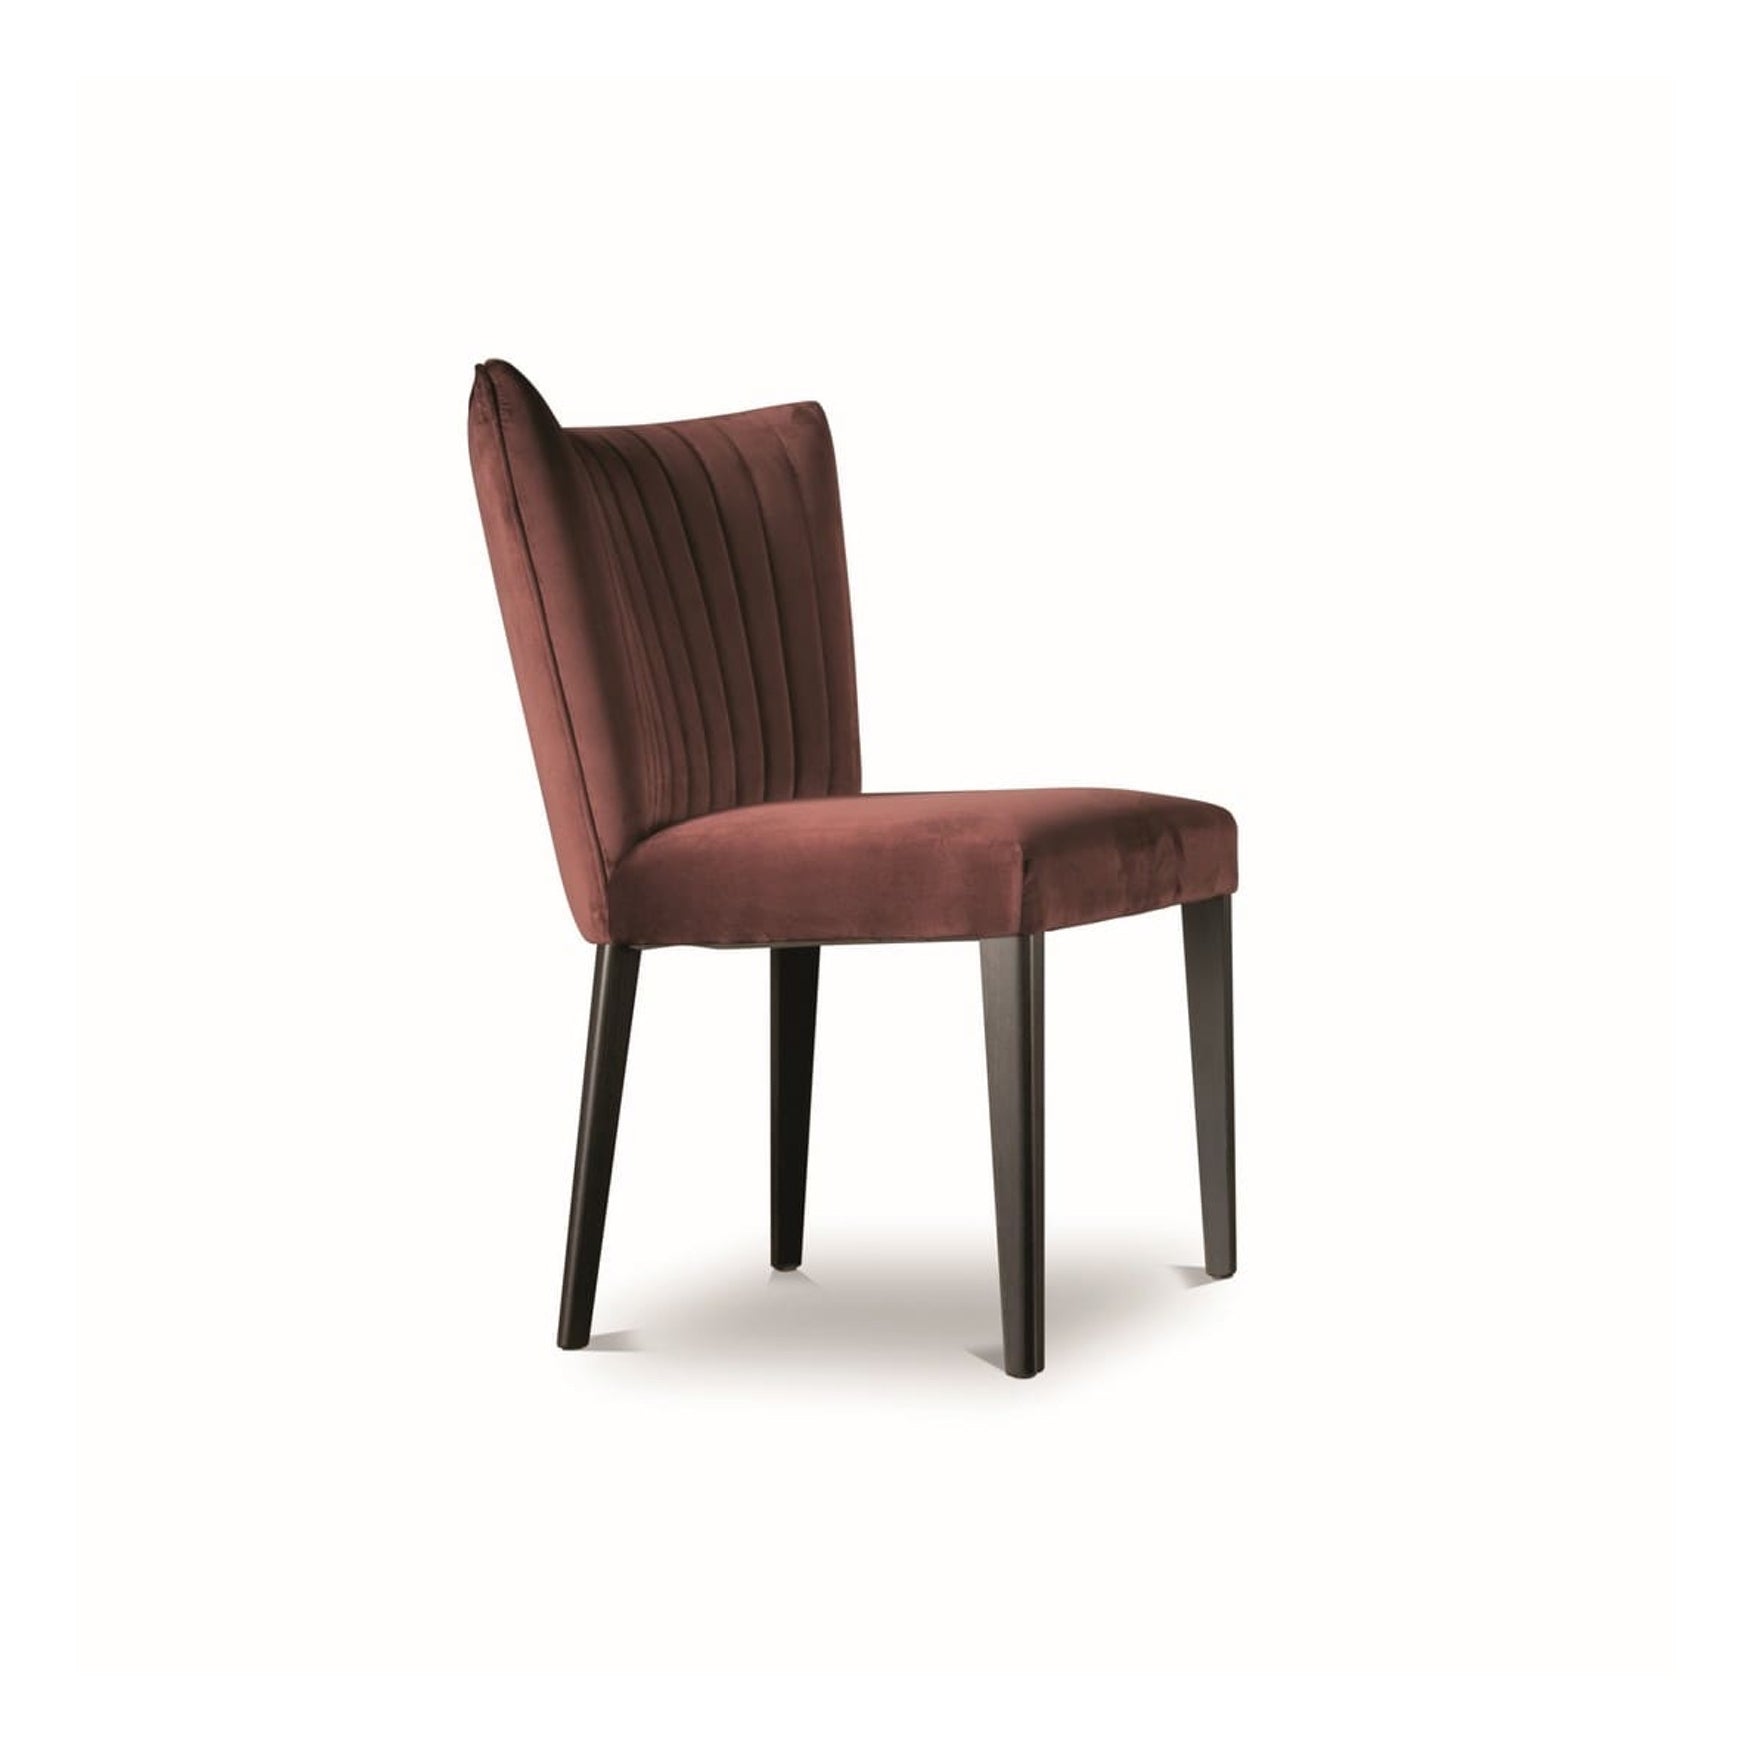 Milady dining chair